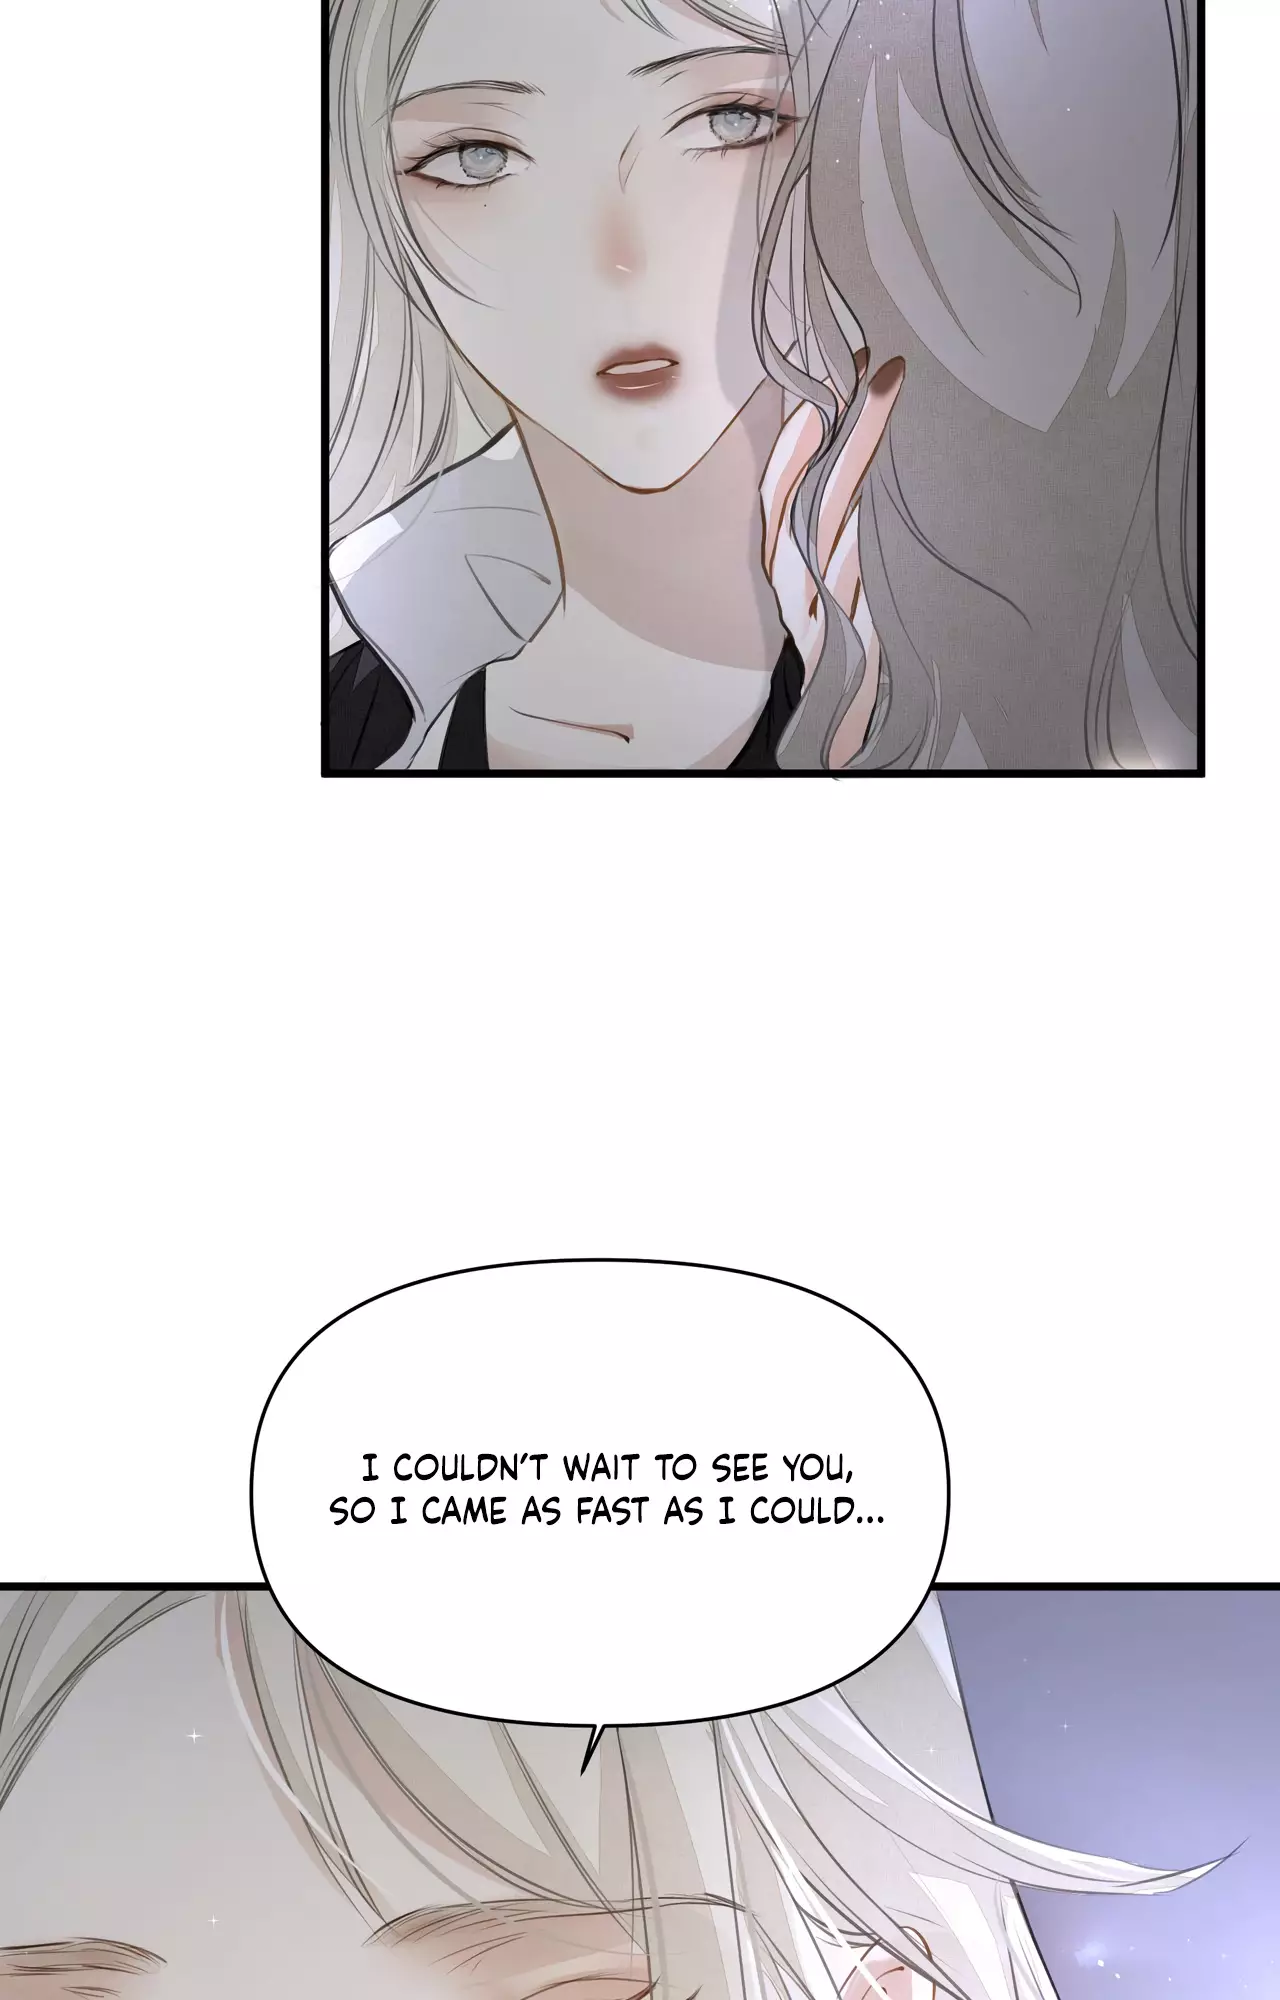 Addicted To Her - 11 page 6-9452c44c